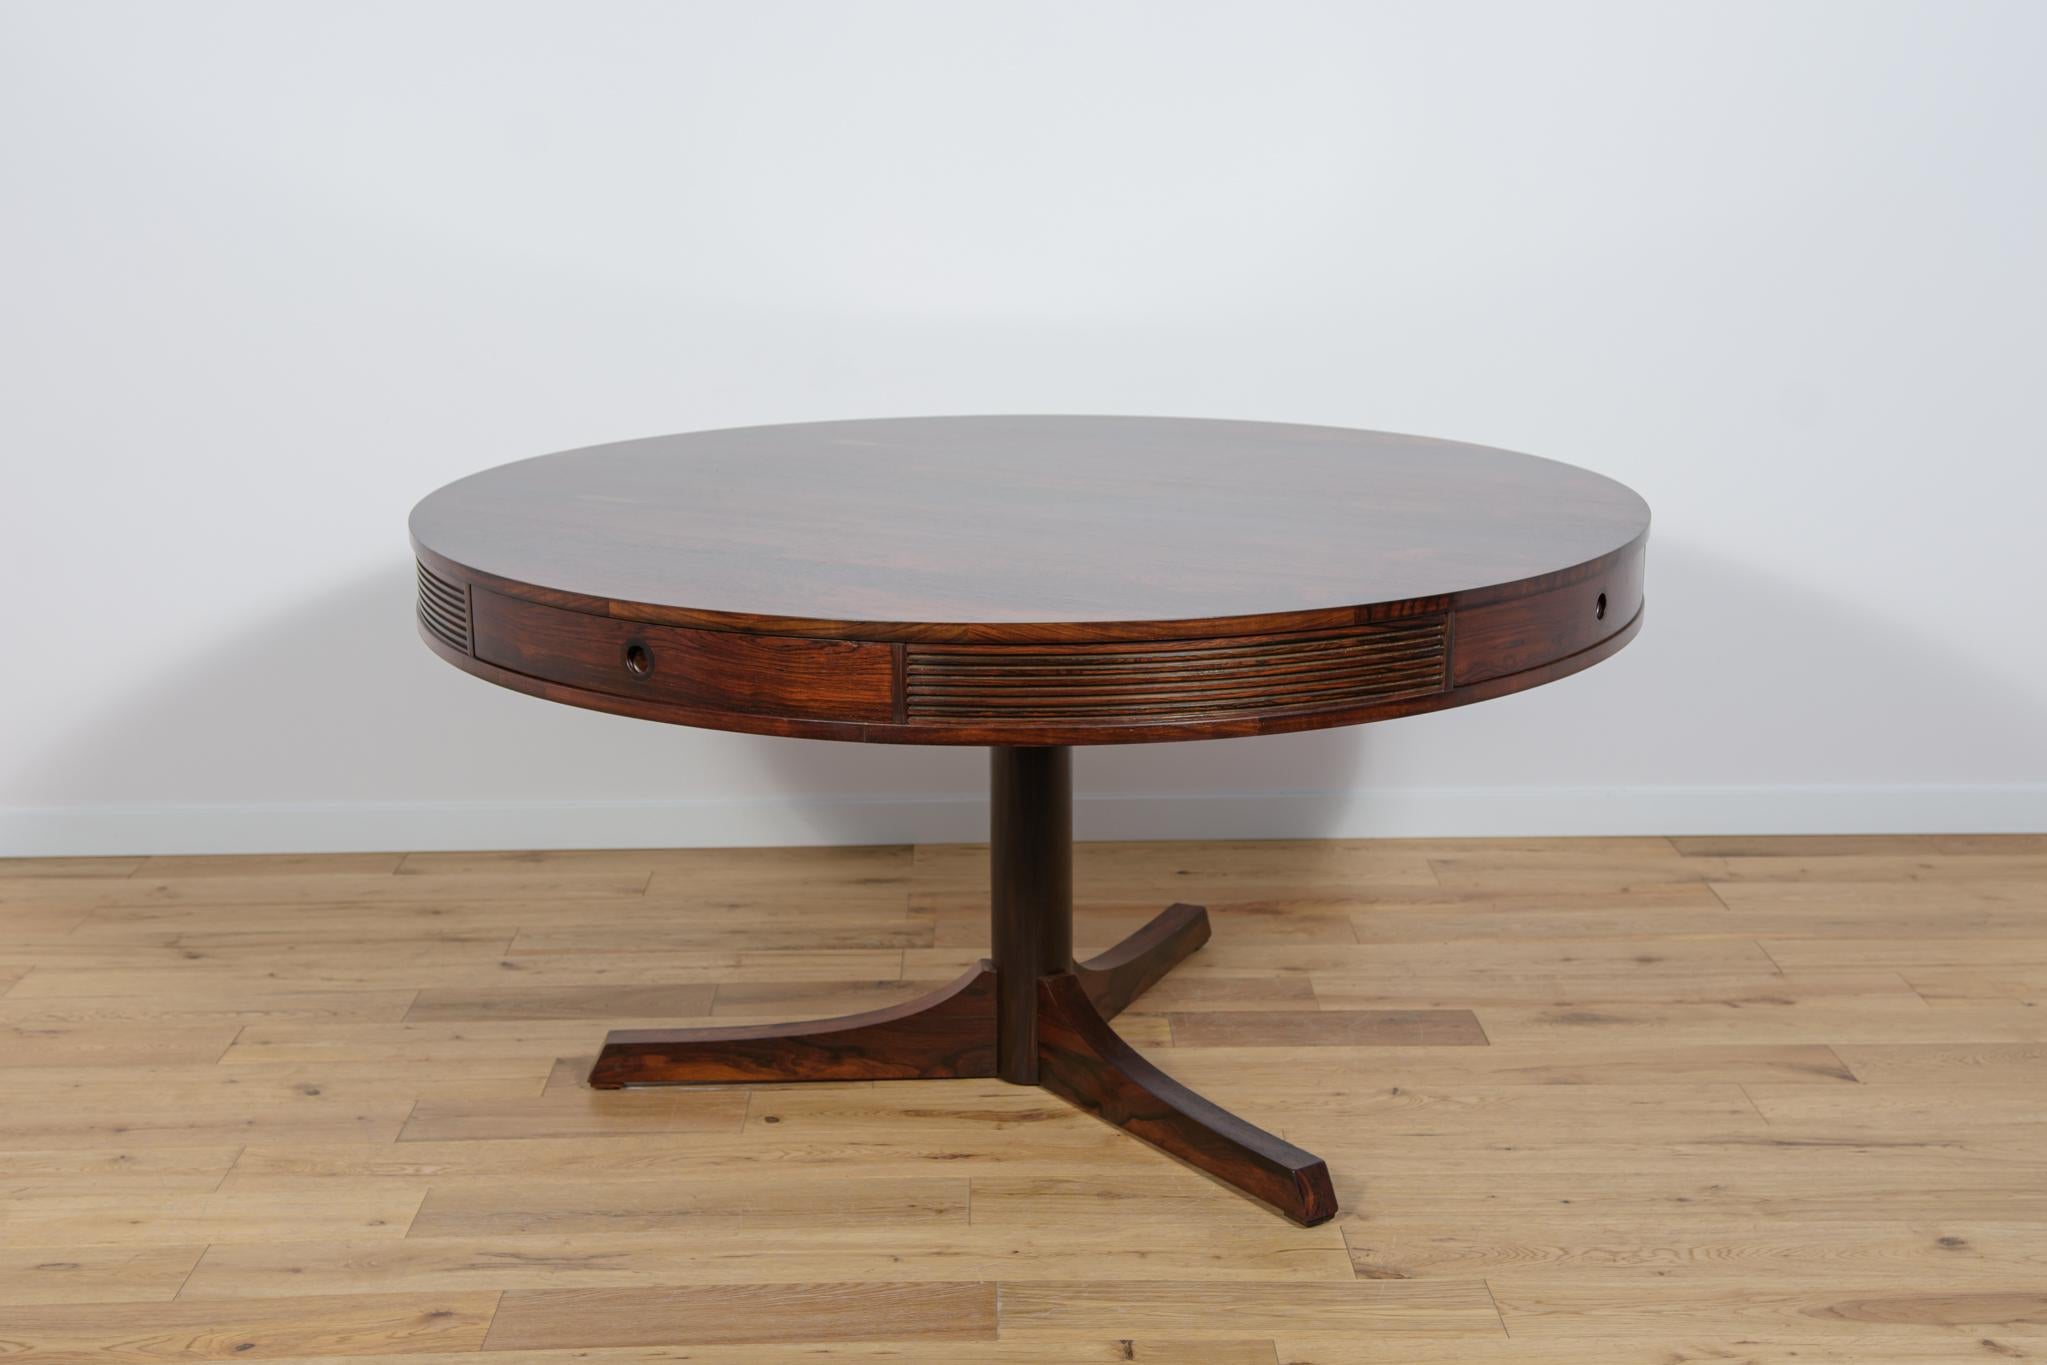 The dining table was designed in 1957 by Robert Heritage and manufactured by Archie Shine in the late 1950s. The table was part of the luxury Bridgeford furniture range, which was sold in english Heals stores during this period. The edge of the